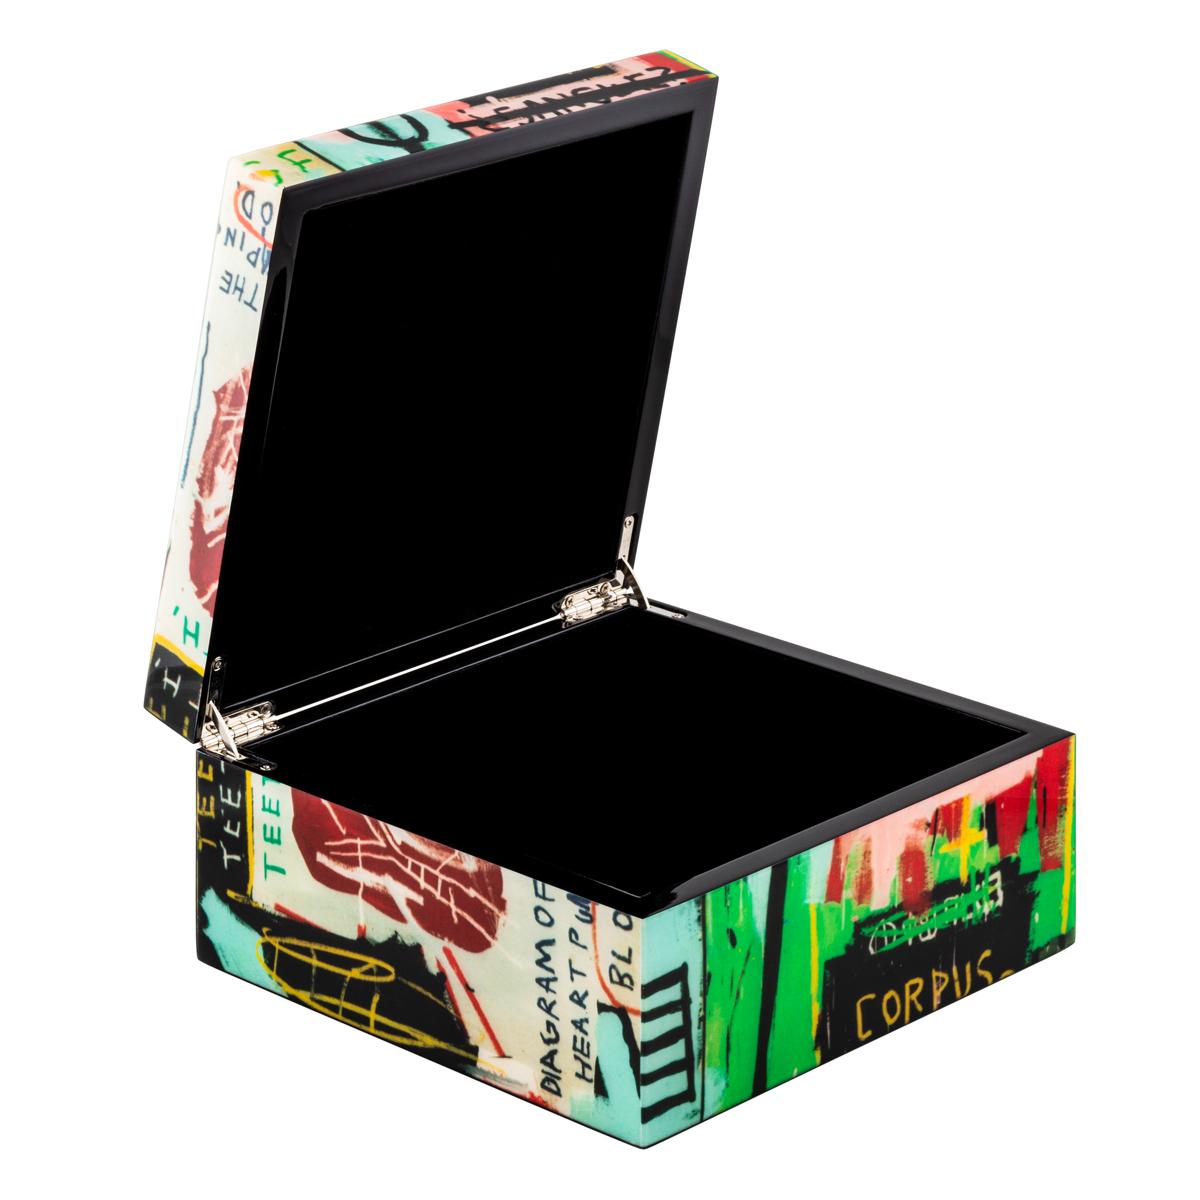 This Artware exclusive pairs Jean-Michel Basquiat's iconic In Italian (1983) with a beautifully hand-crafted lacquer box. The felt lining makes it perfect for storing jewelry and other special personal items, or simply throw your keys and change in